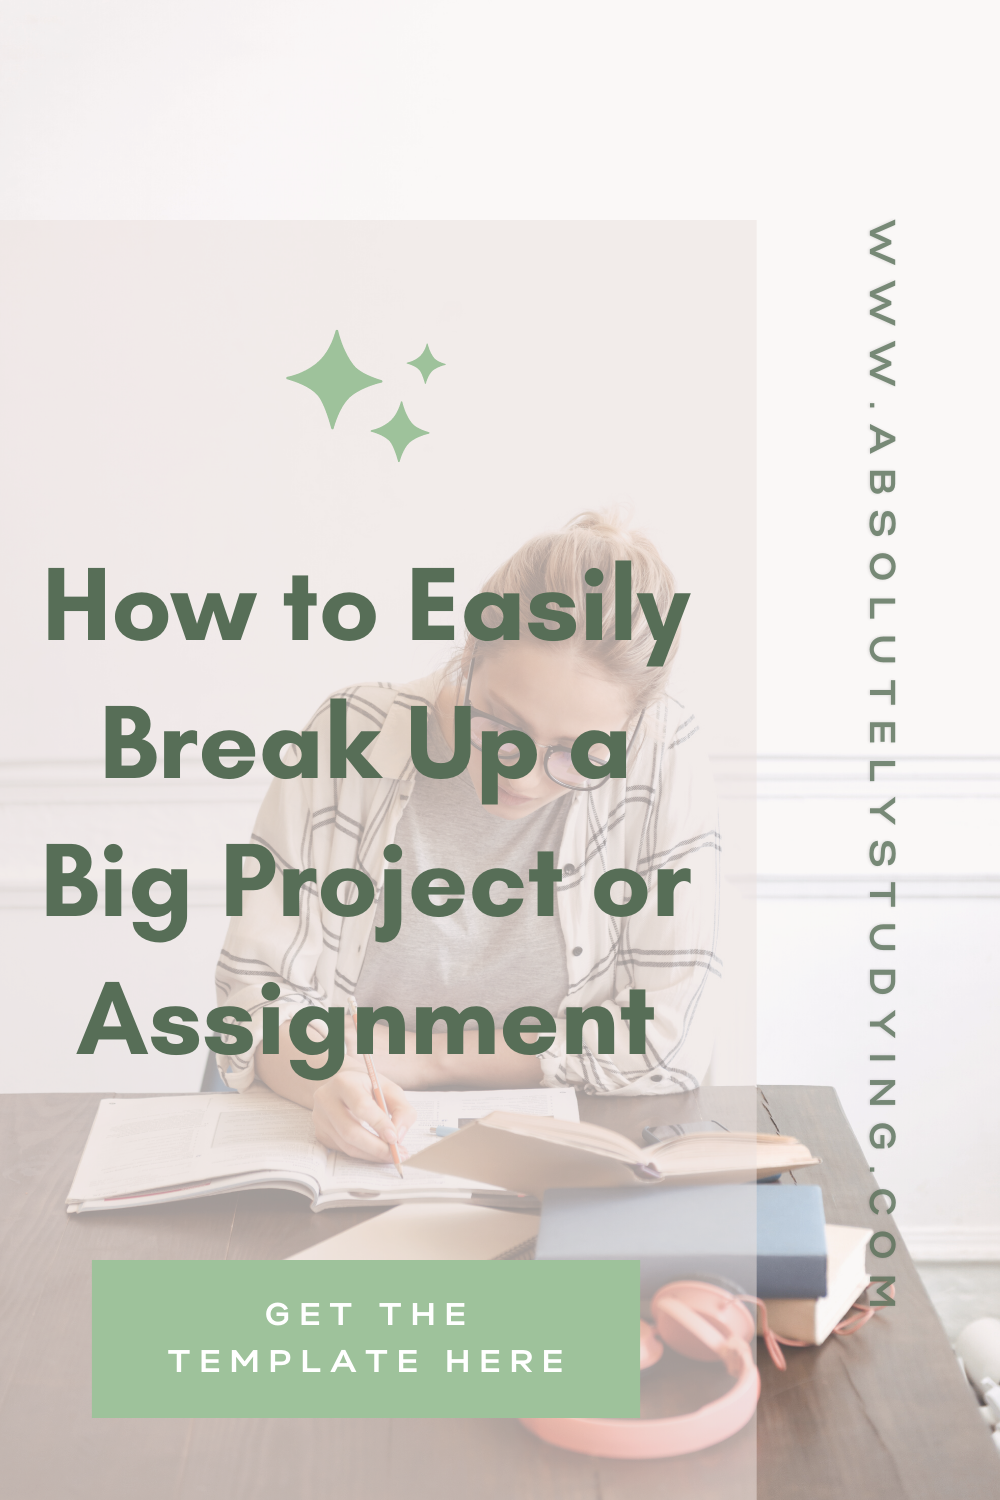 How to break up a big project or assignment.